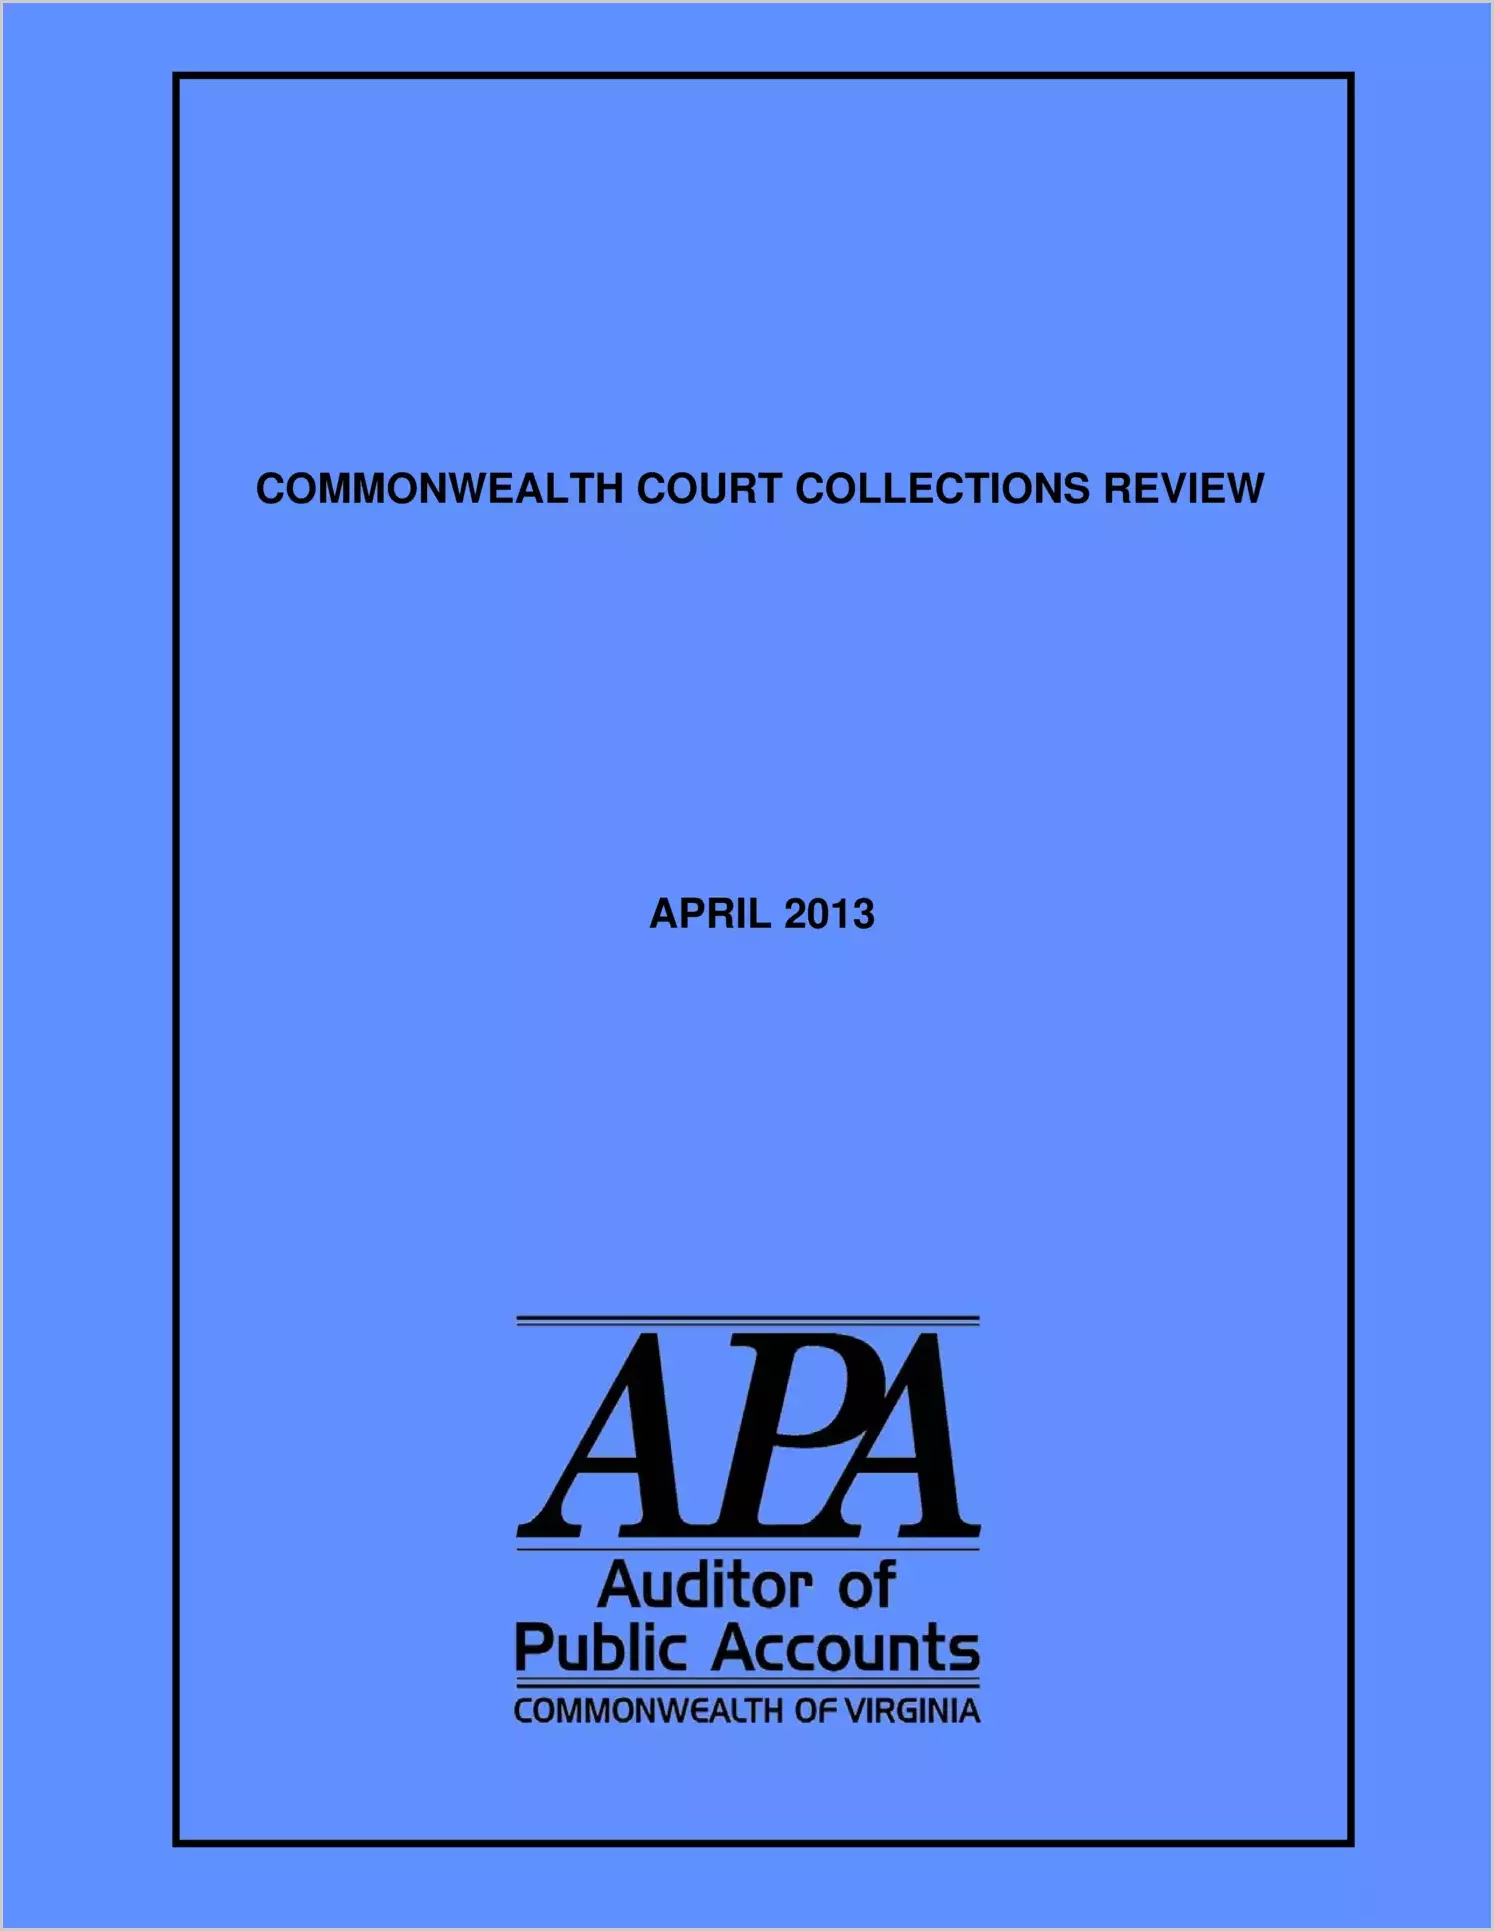 Commonwealth Court Collections Review - April 2013